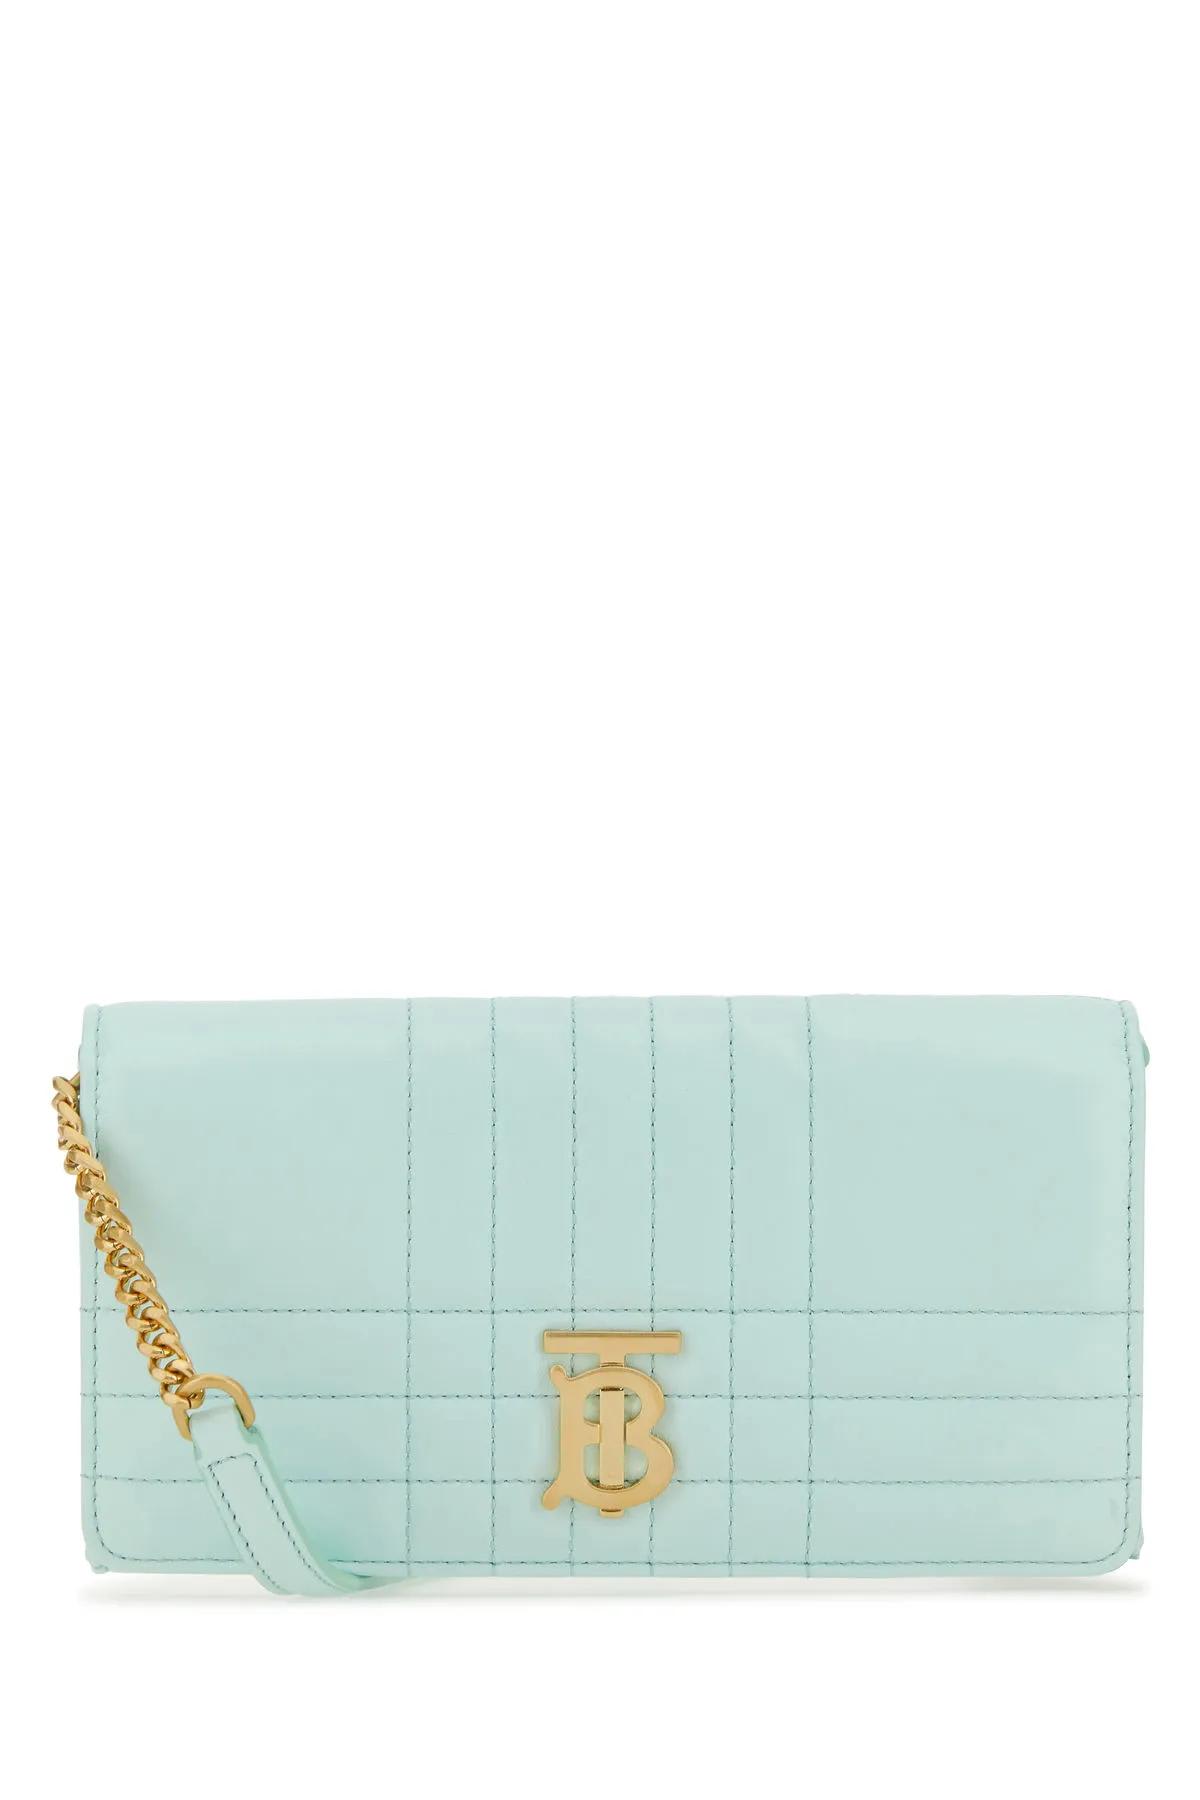 BURBERRY SEA GREEN LEATHER LOLA WALLET